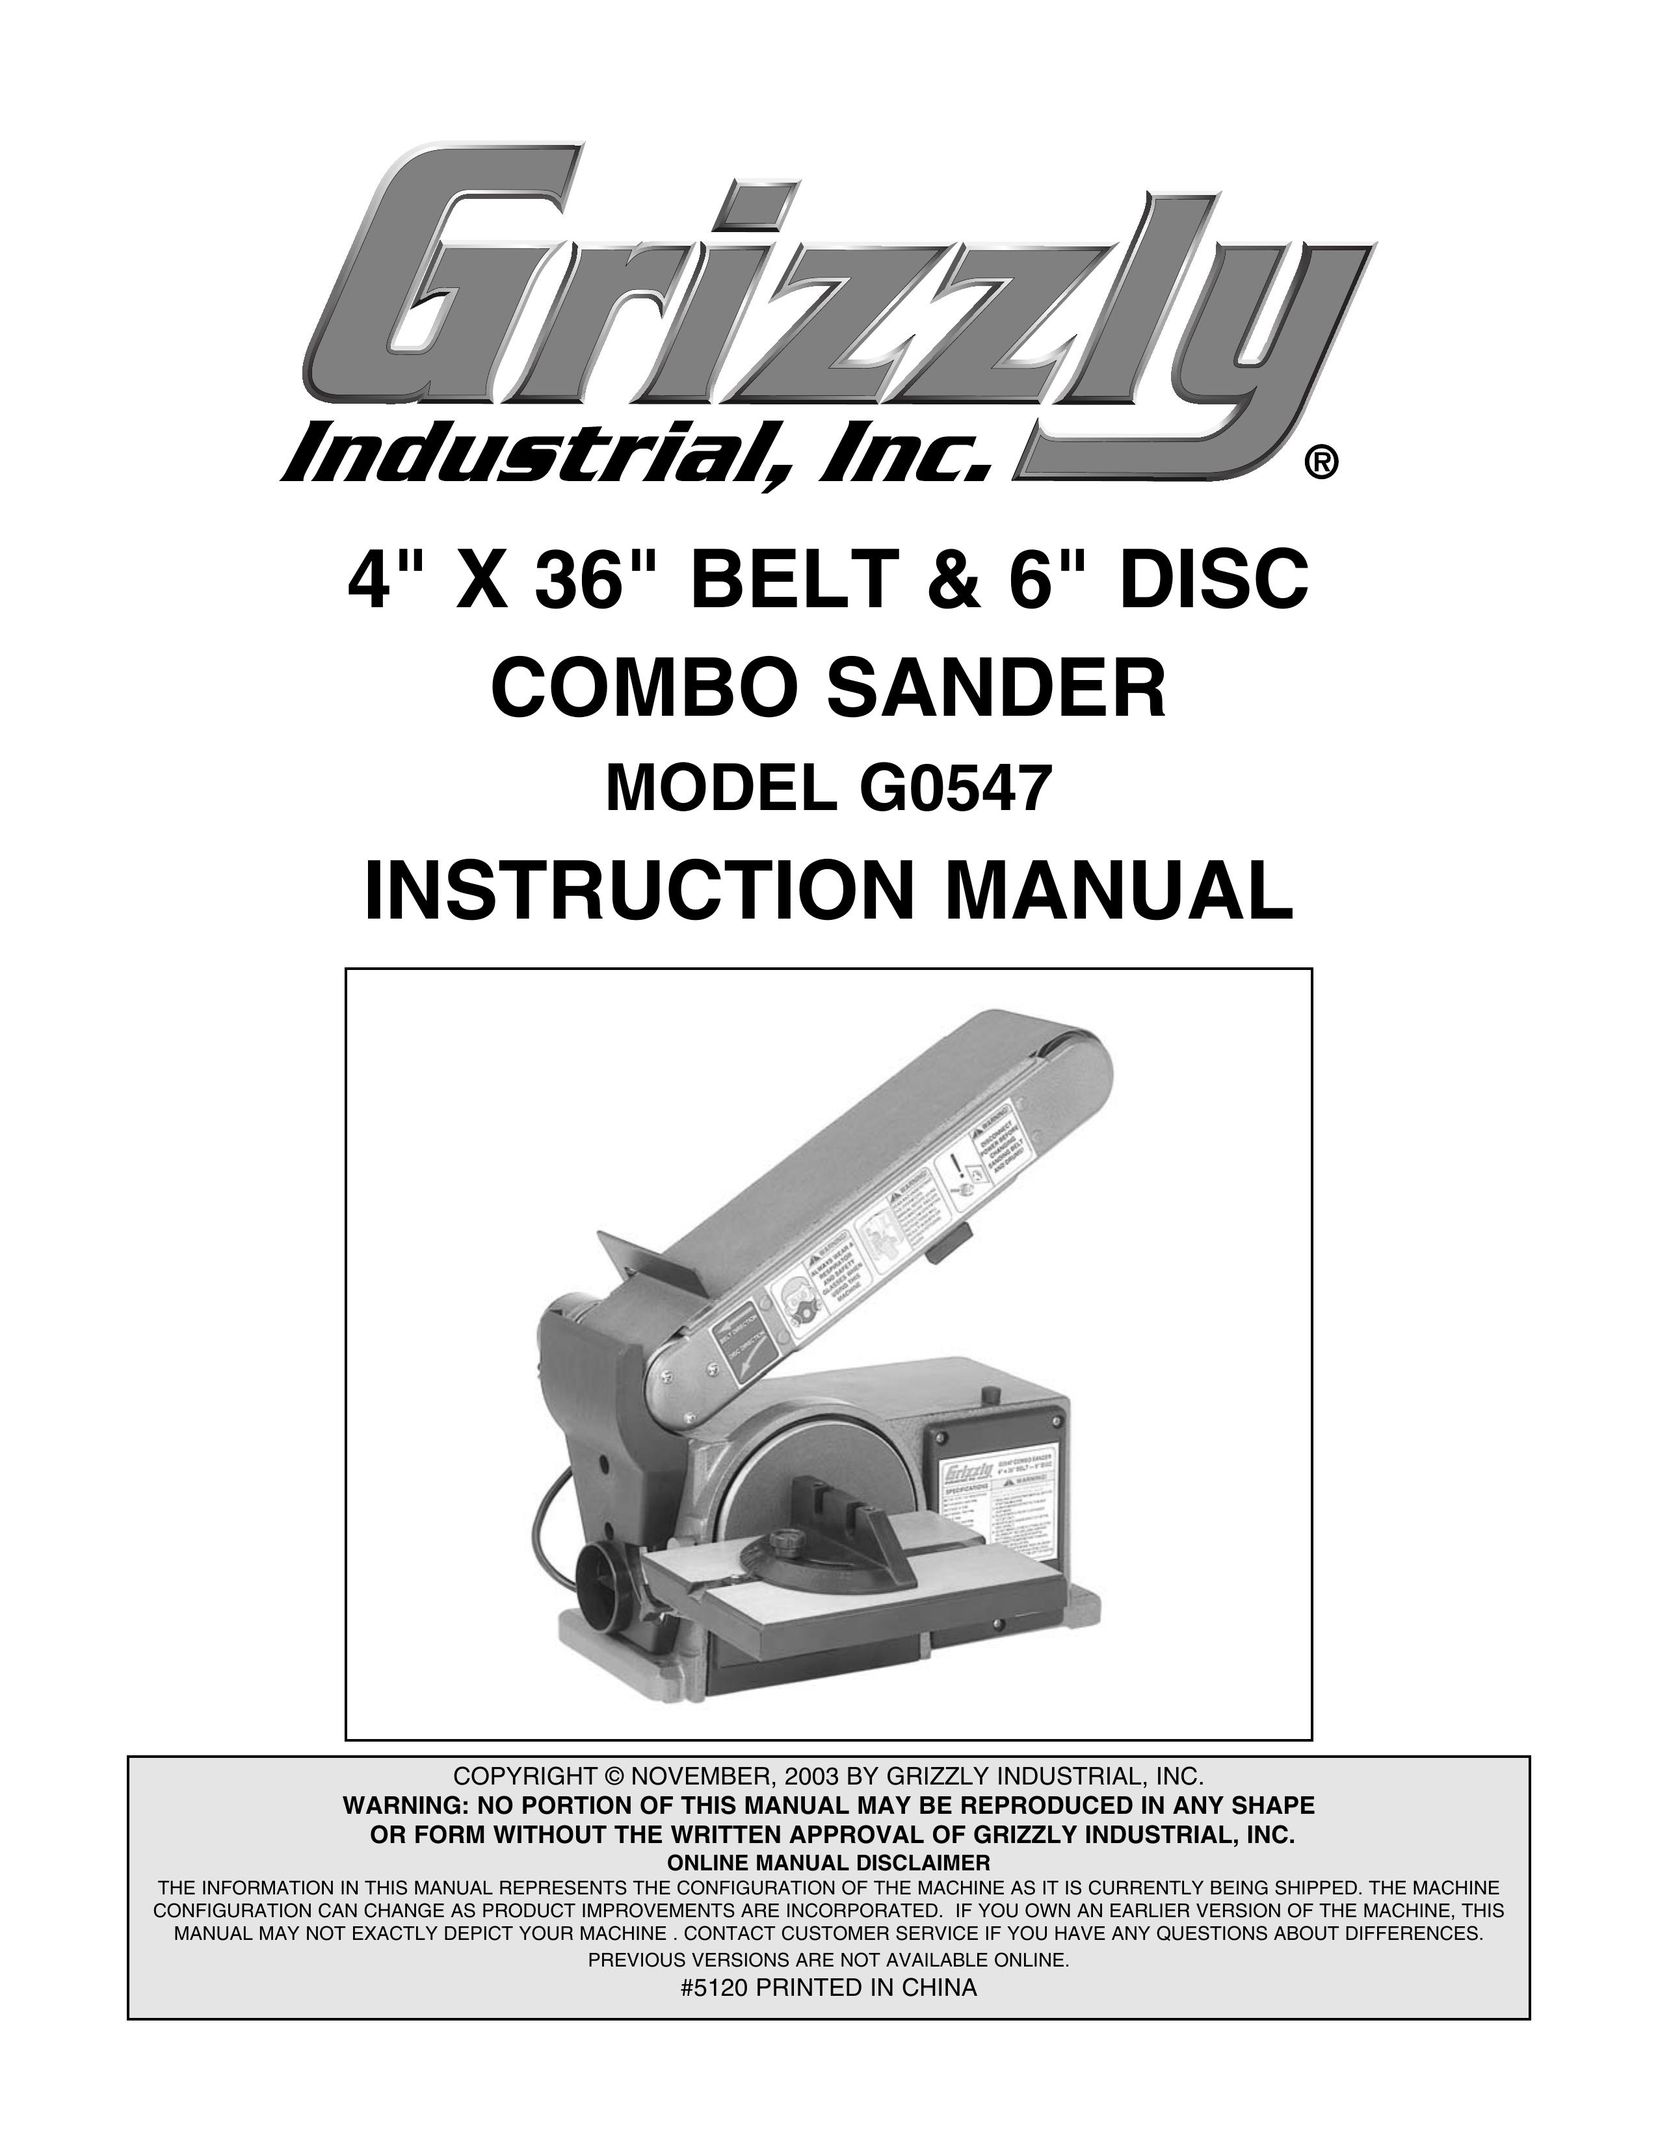 Grizzly G0547 Sander User Manual